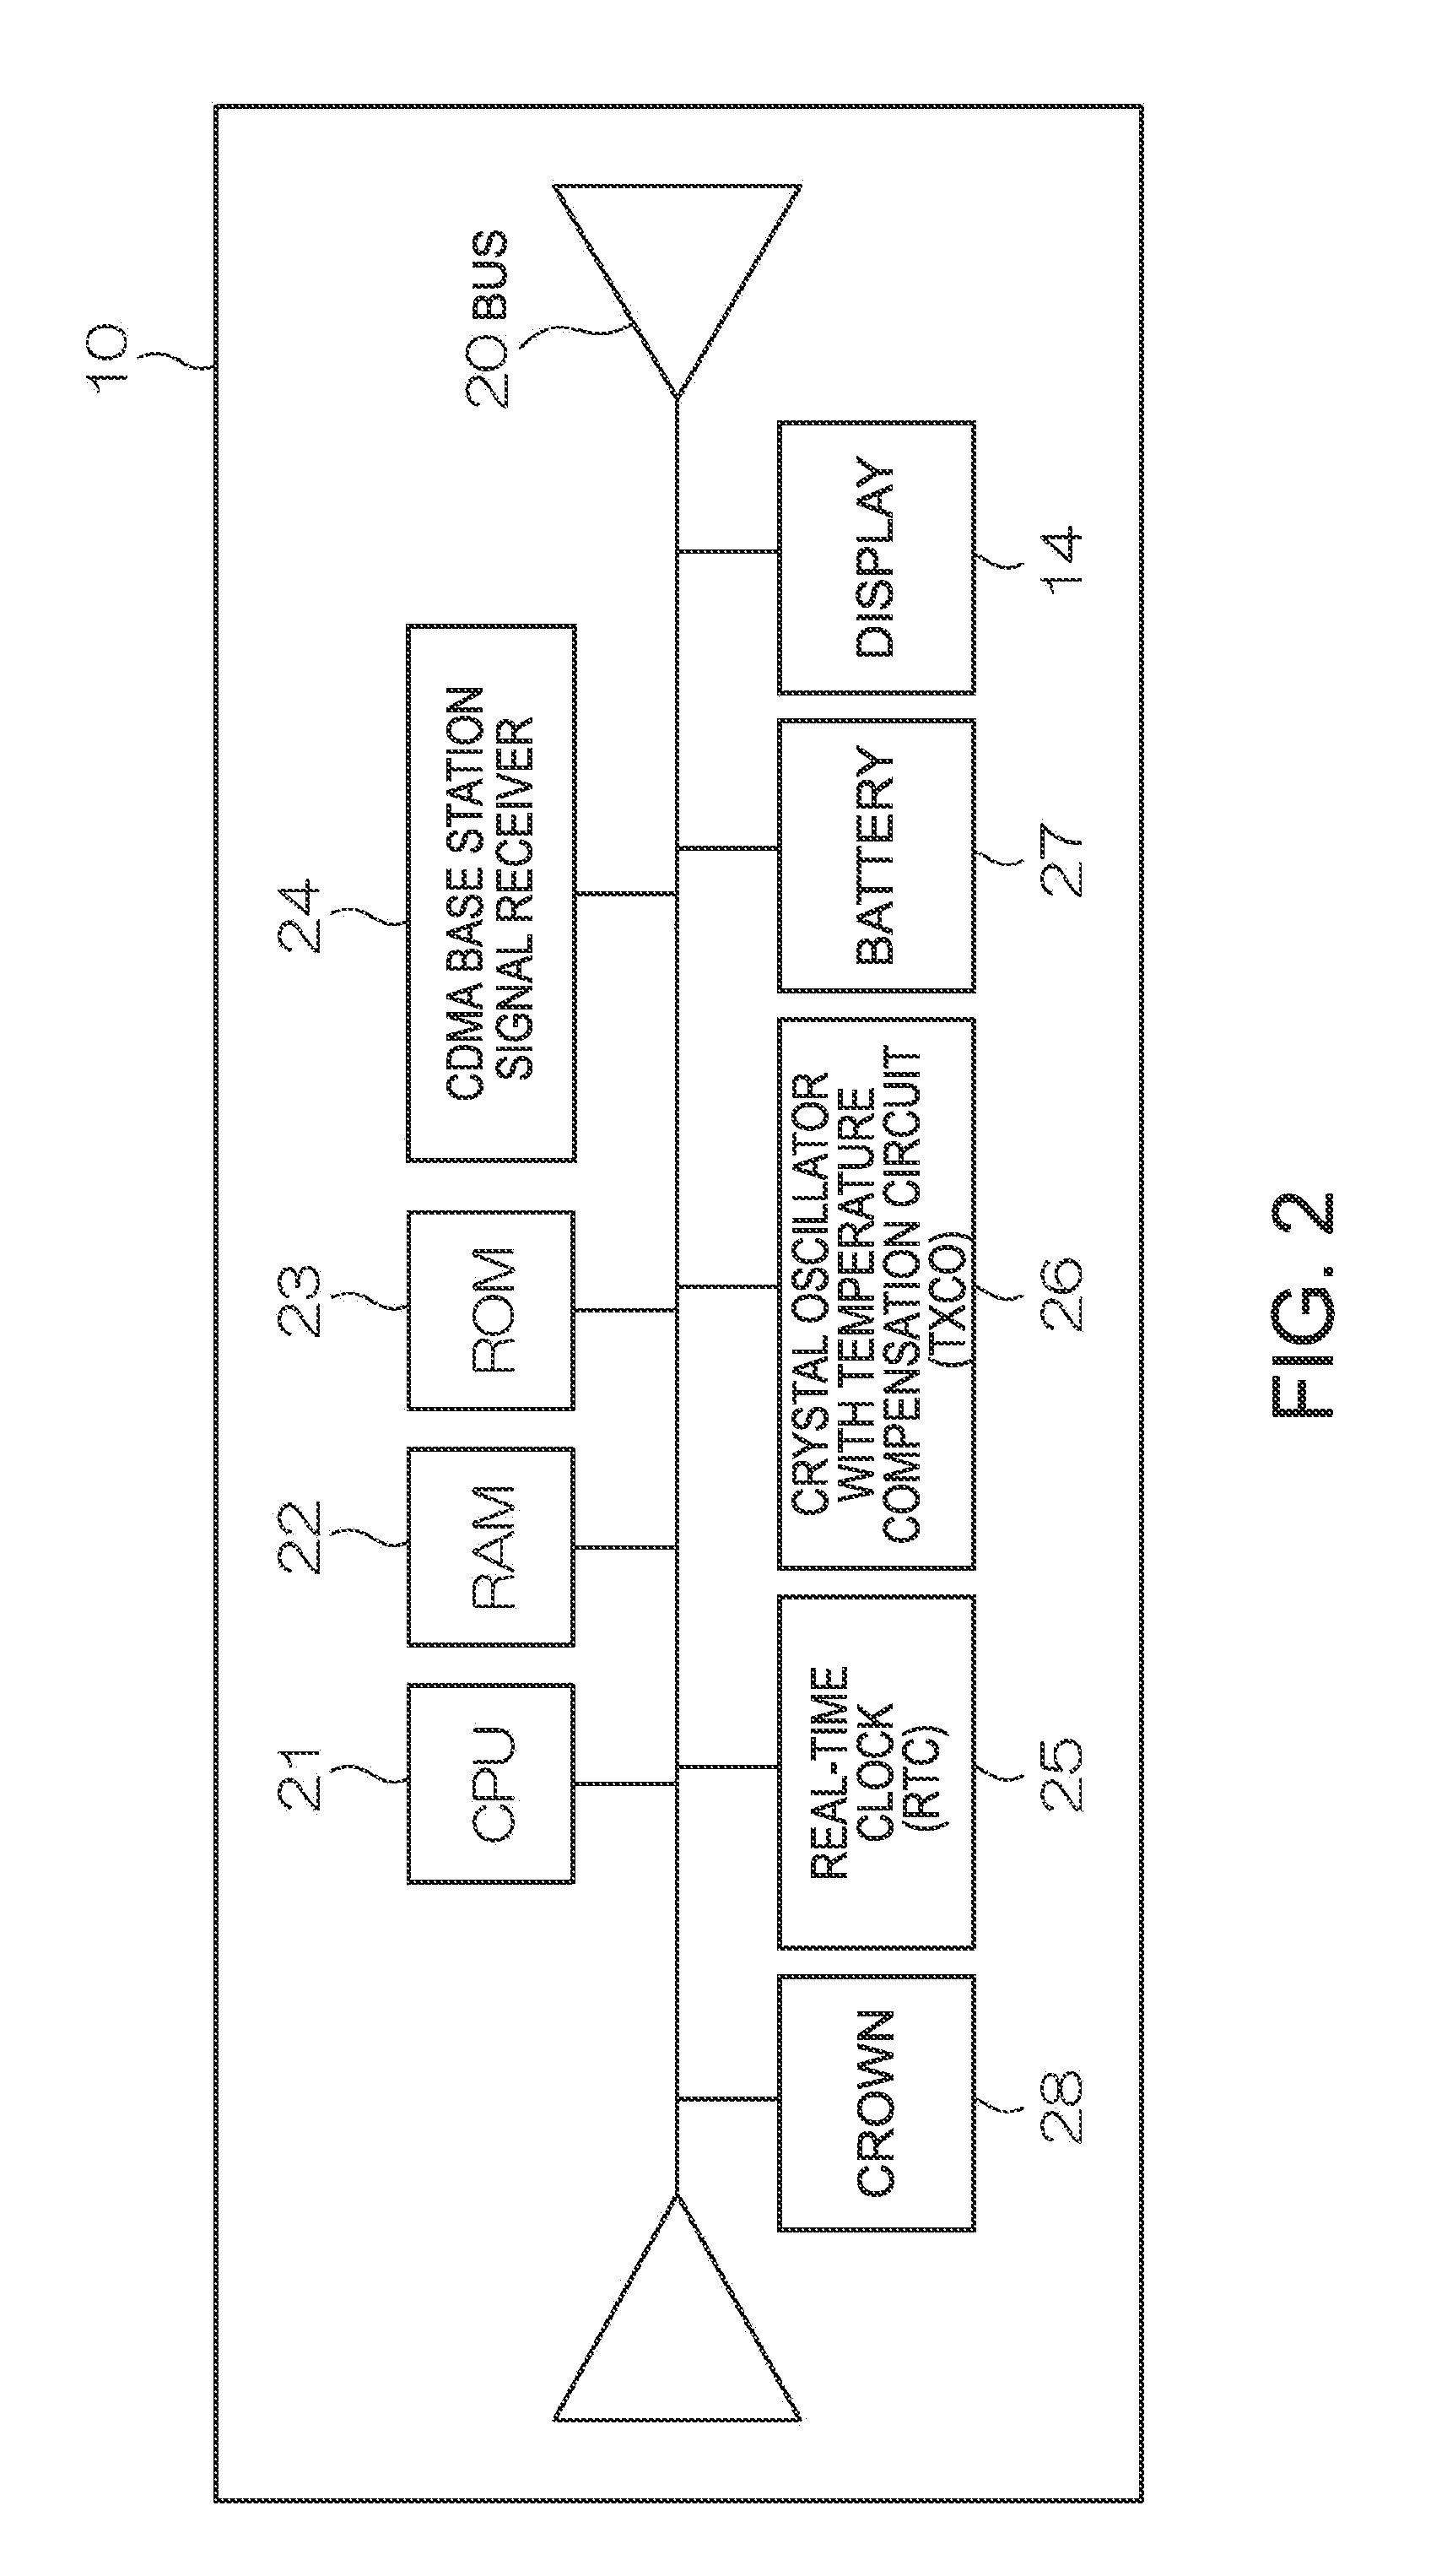 Time Adjustment Device, Timepiece with a Time Adjustment Device, and Time Adjustment Method